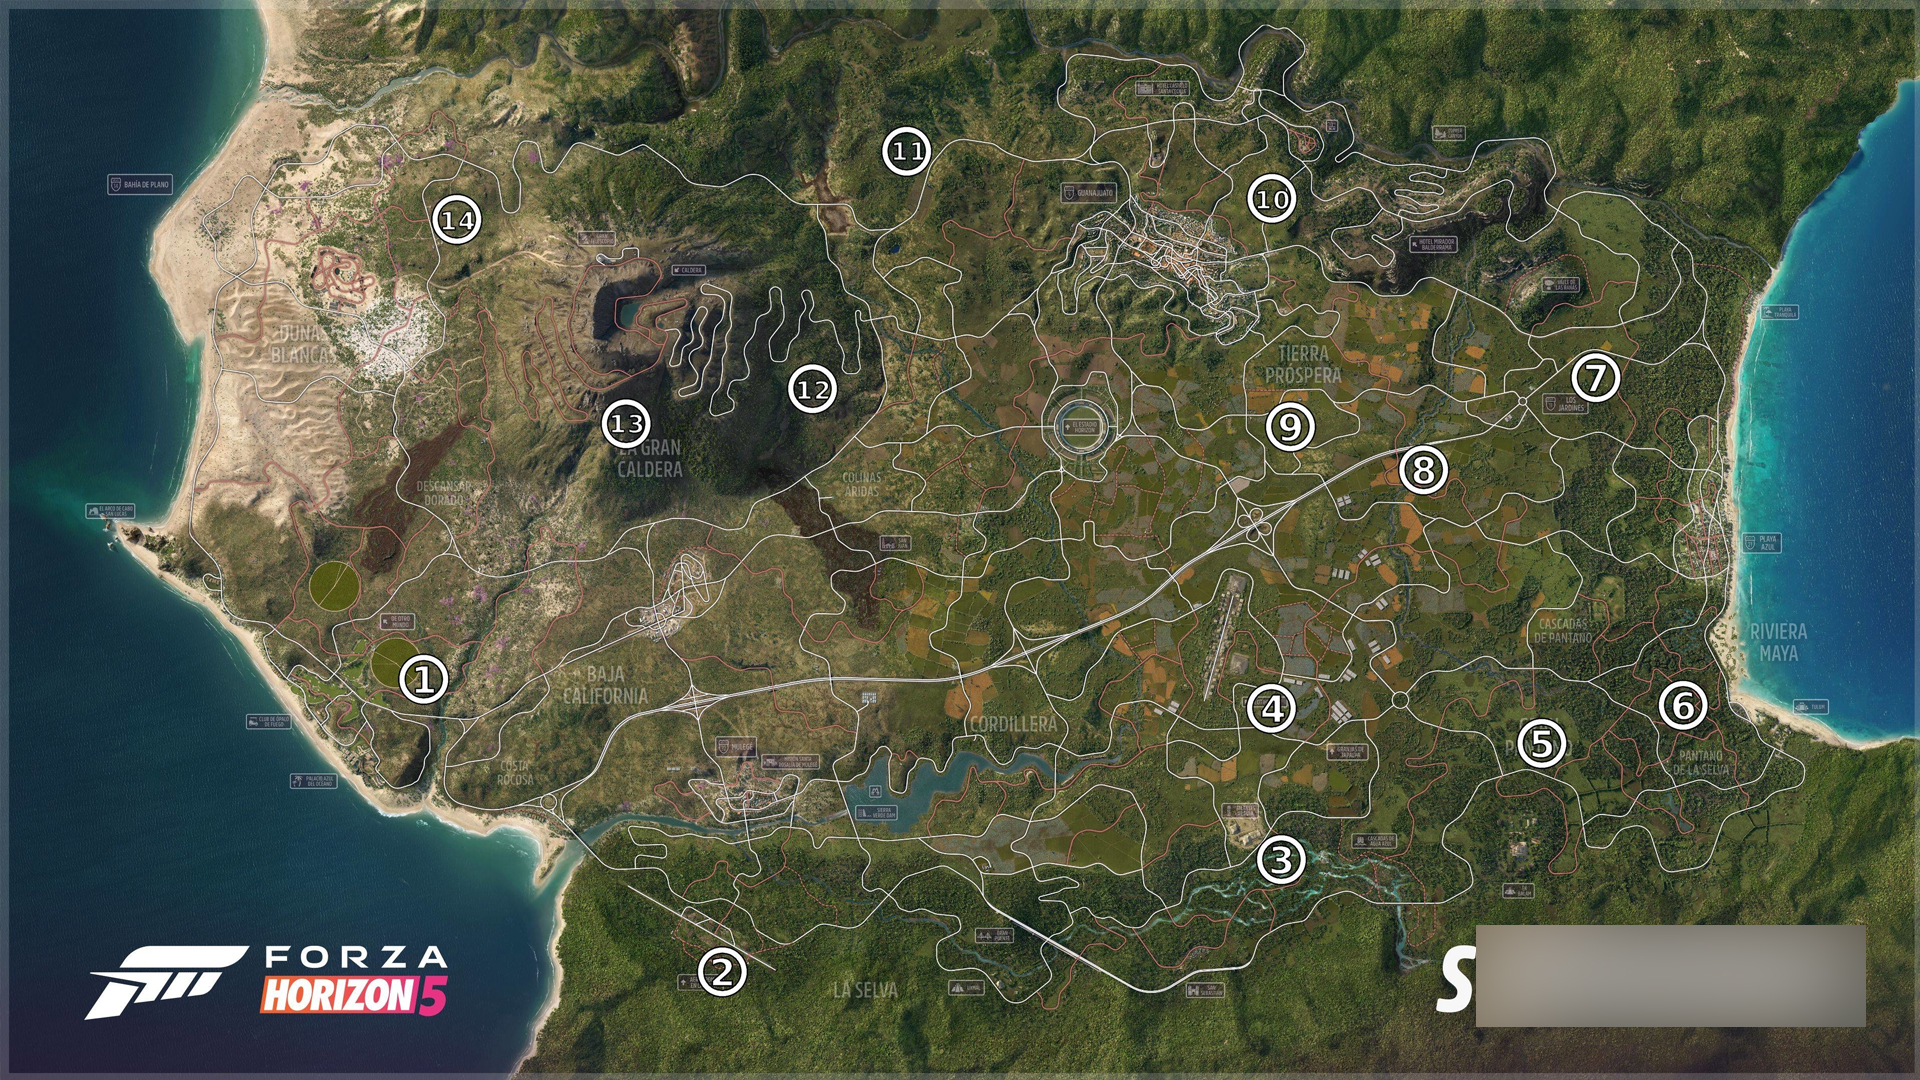 Forza Horizon 5 All Barns Complete Locations Map Guide - All Barns - 45F063B